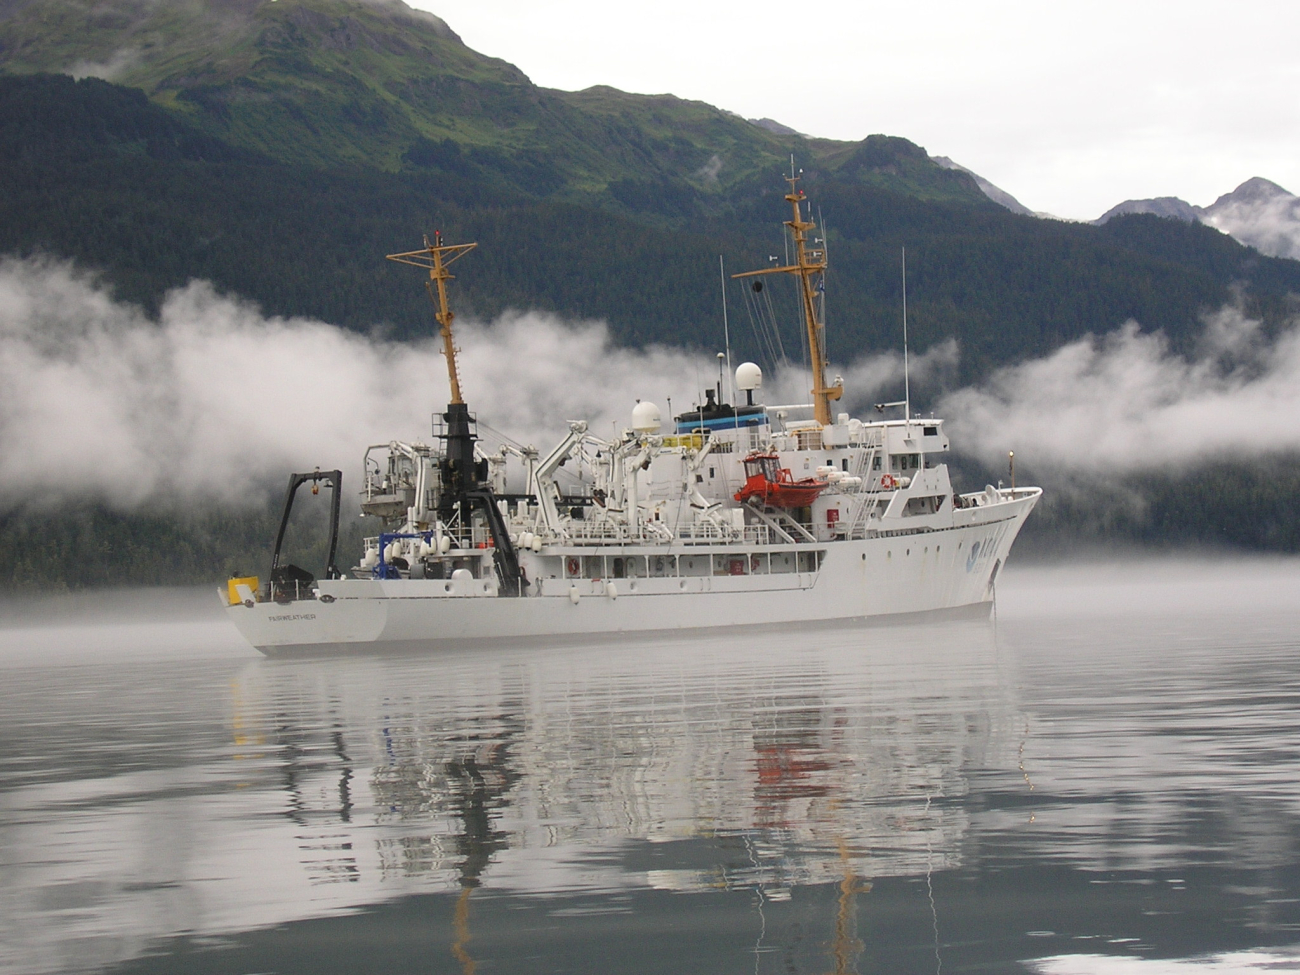 NOAA Ship FAIRWEATHER anchored in Nelson Bay area